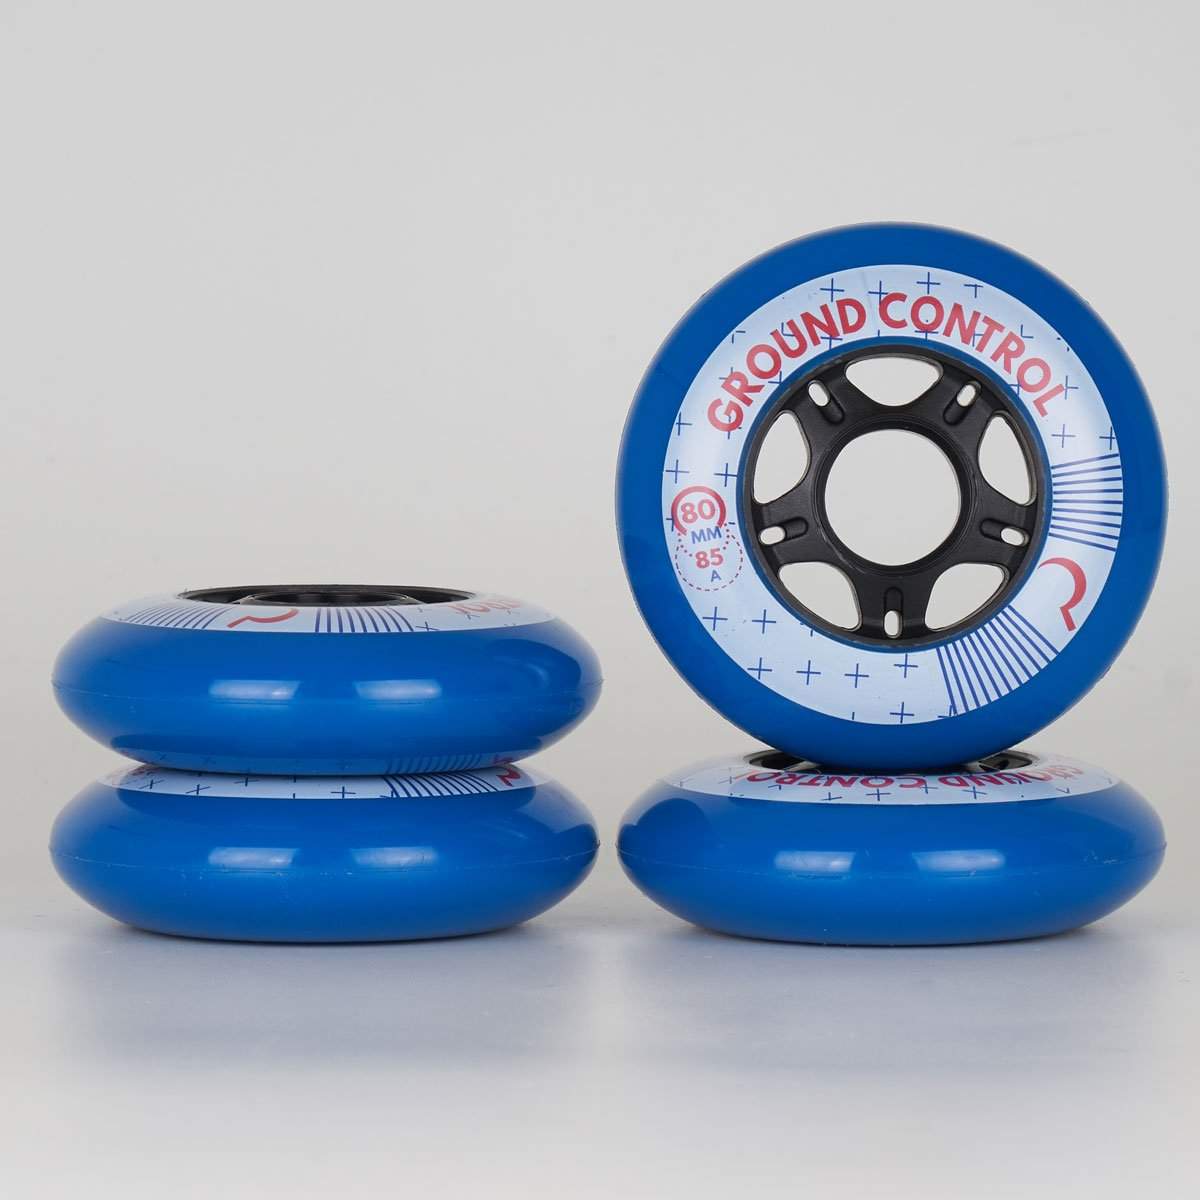 Ground Control FSK Wheels 80mm / 85A - Blue-Ground Control-80mm,Aggressive Skate,atcUpsellCol:upsellwheels,blue,Skate Parts,Wheels